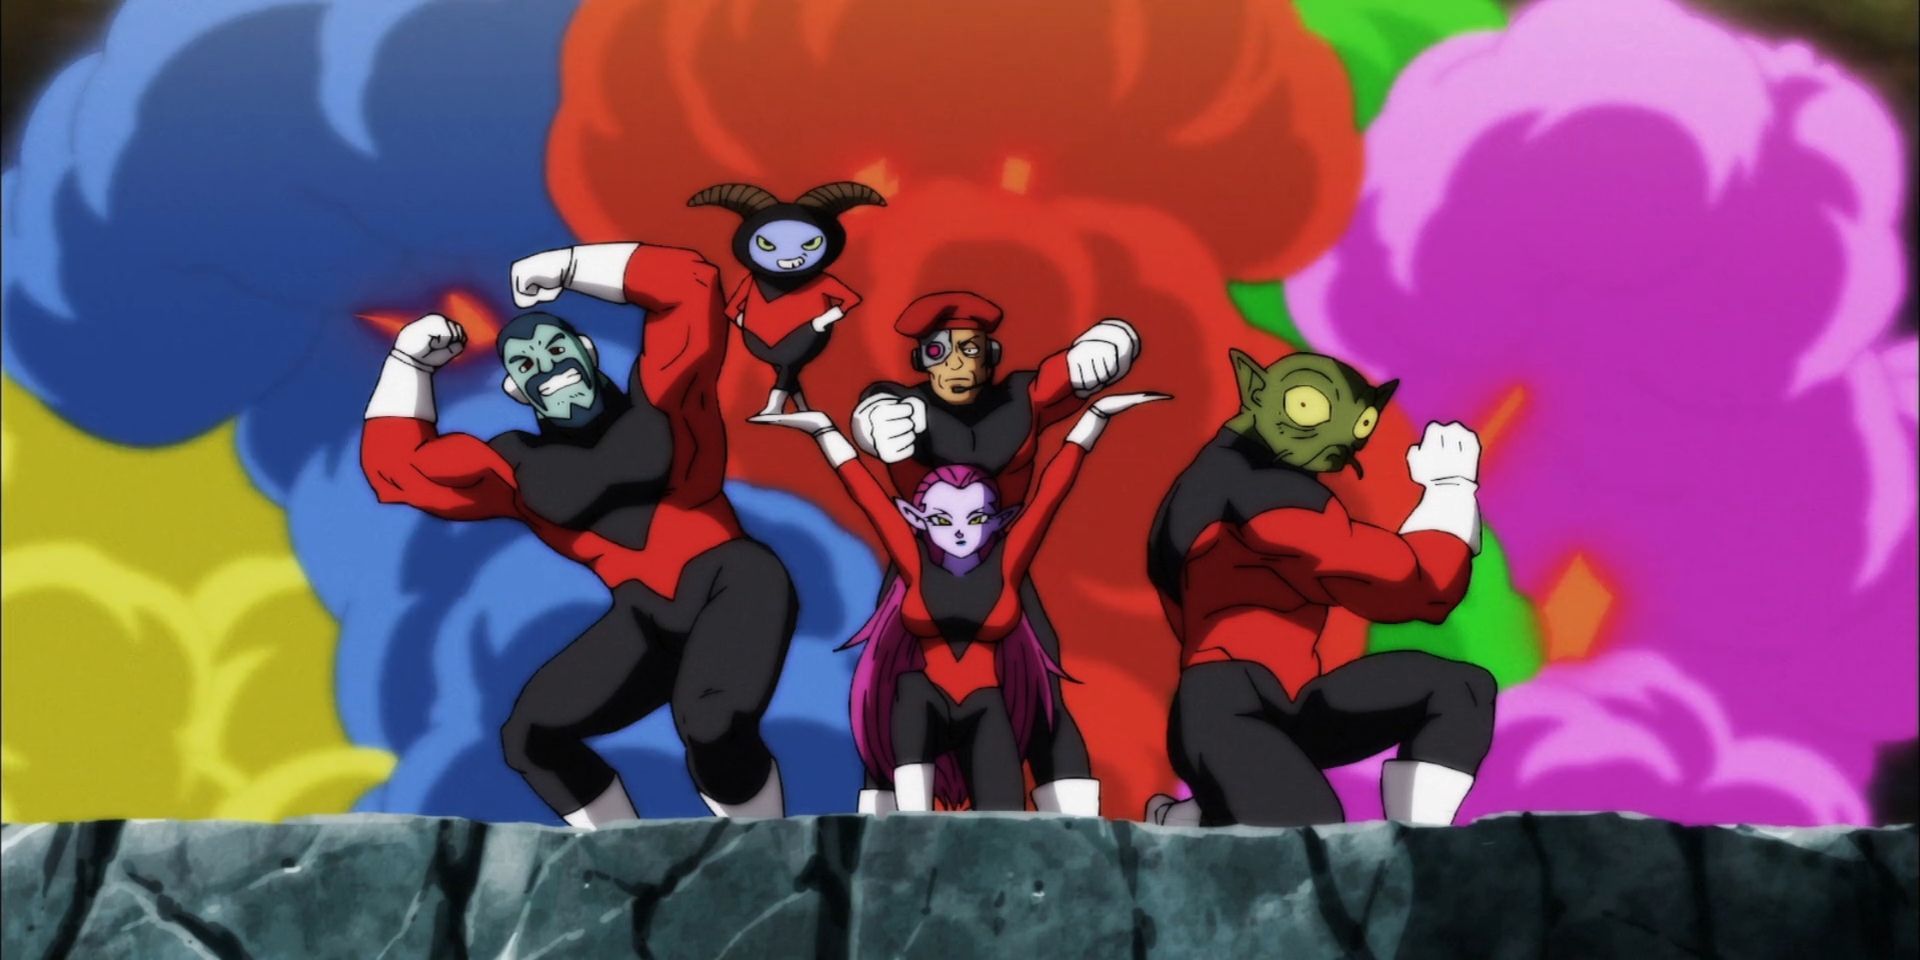 The Pride Troopers from the Dragon Ball anime.